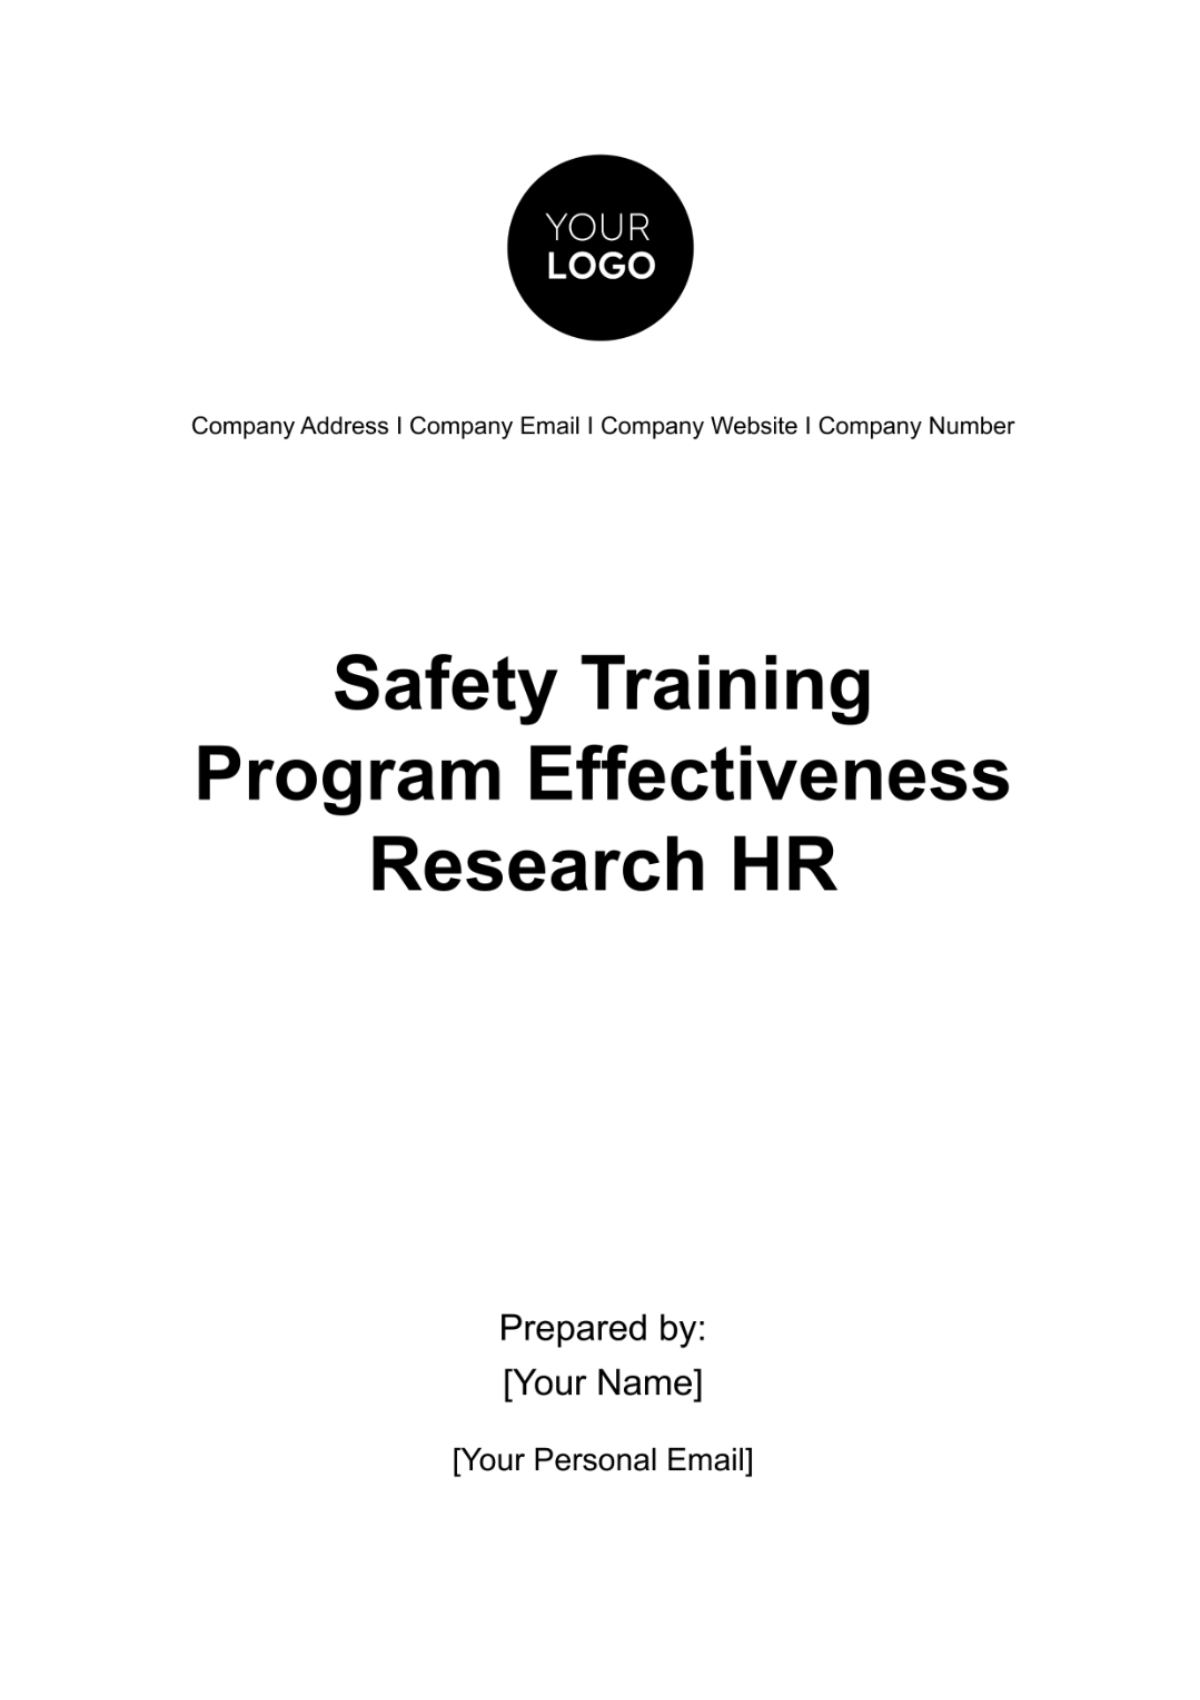 Free Safety Training Program Effectiveness Research HR Template